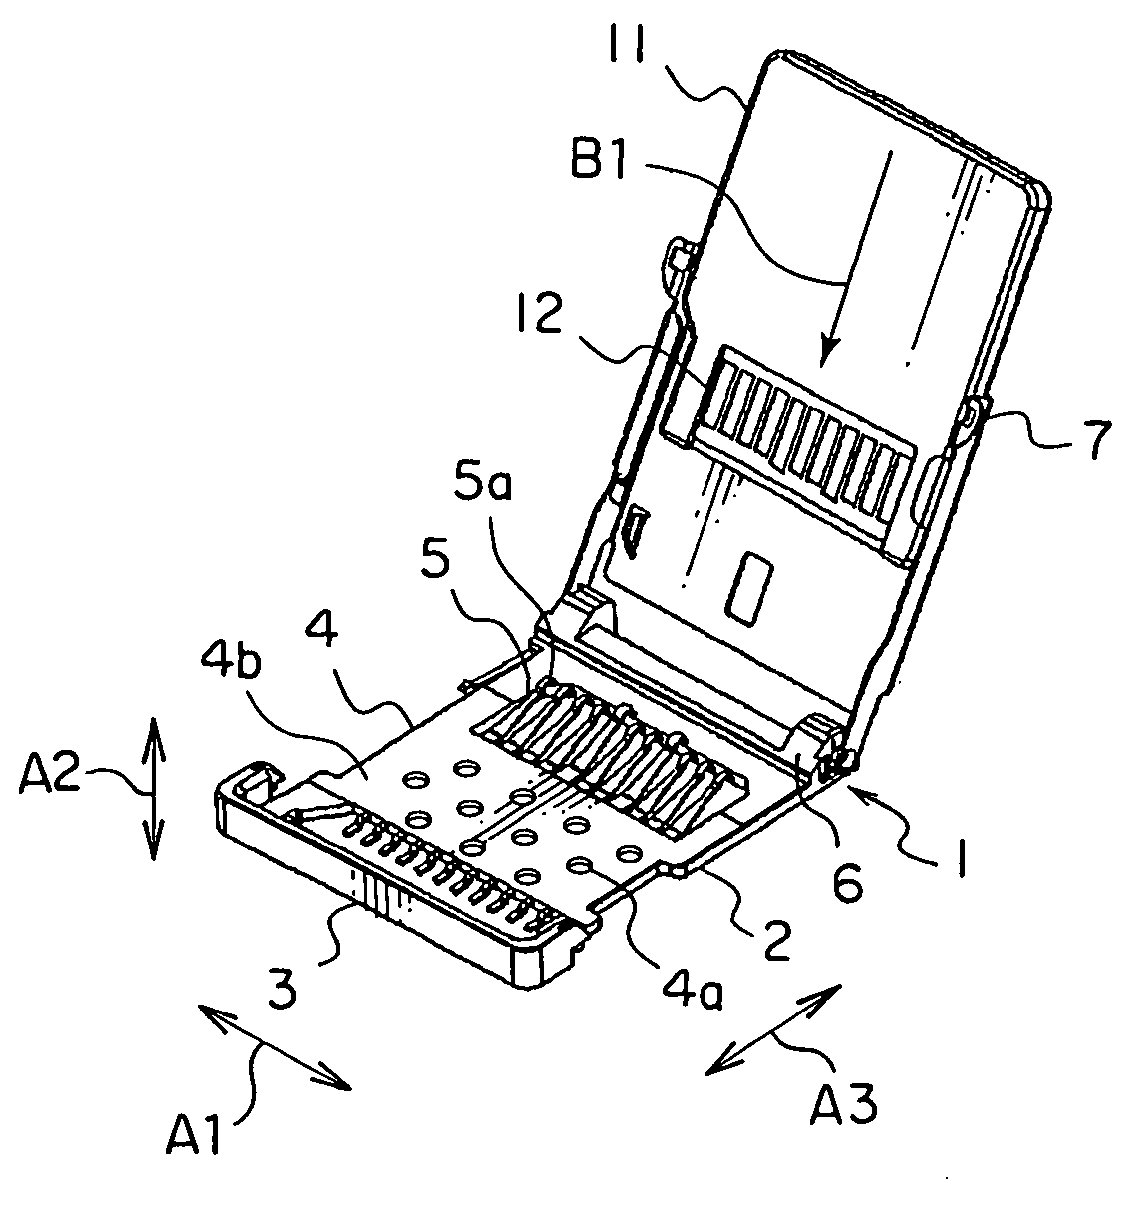 Connector easily enabling electrical inspection of contacts